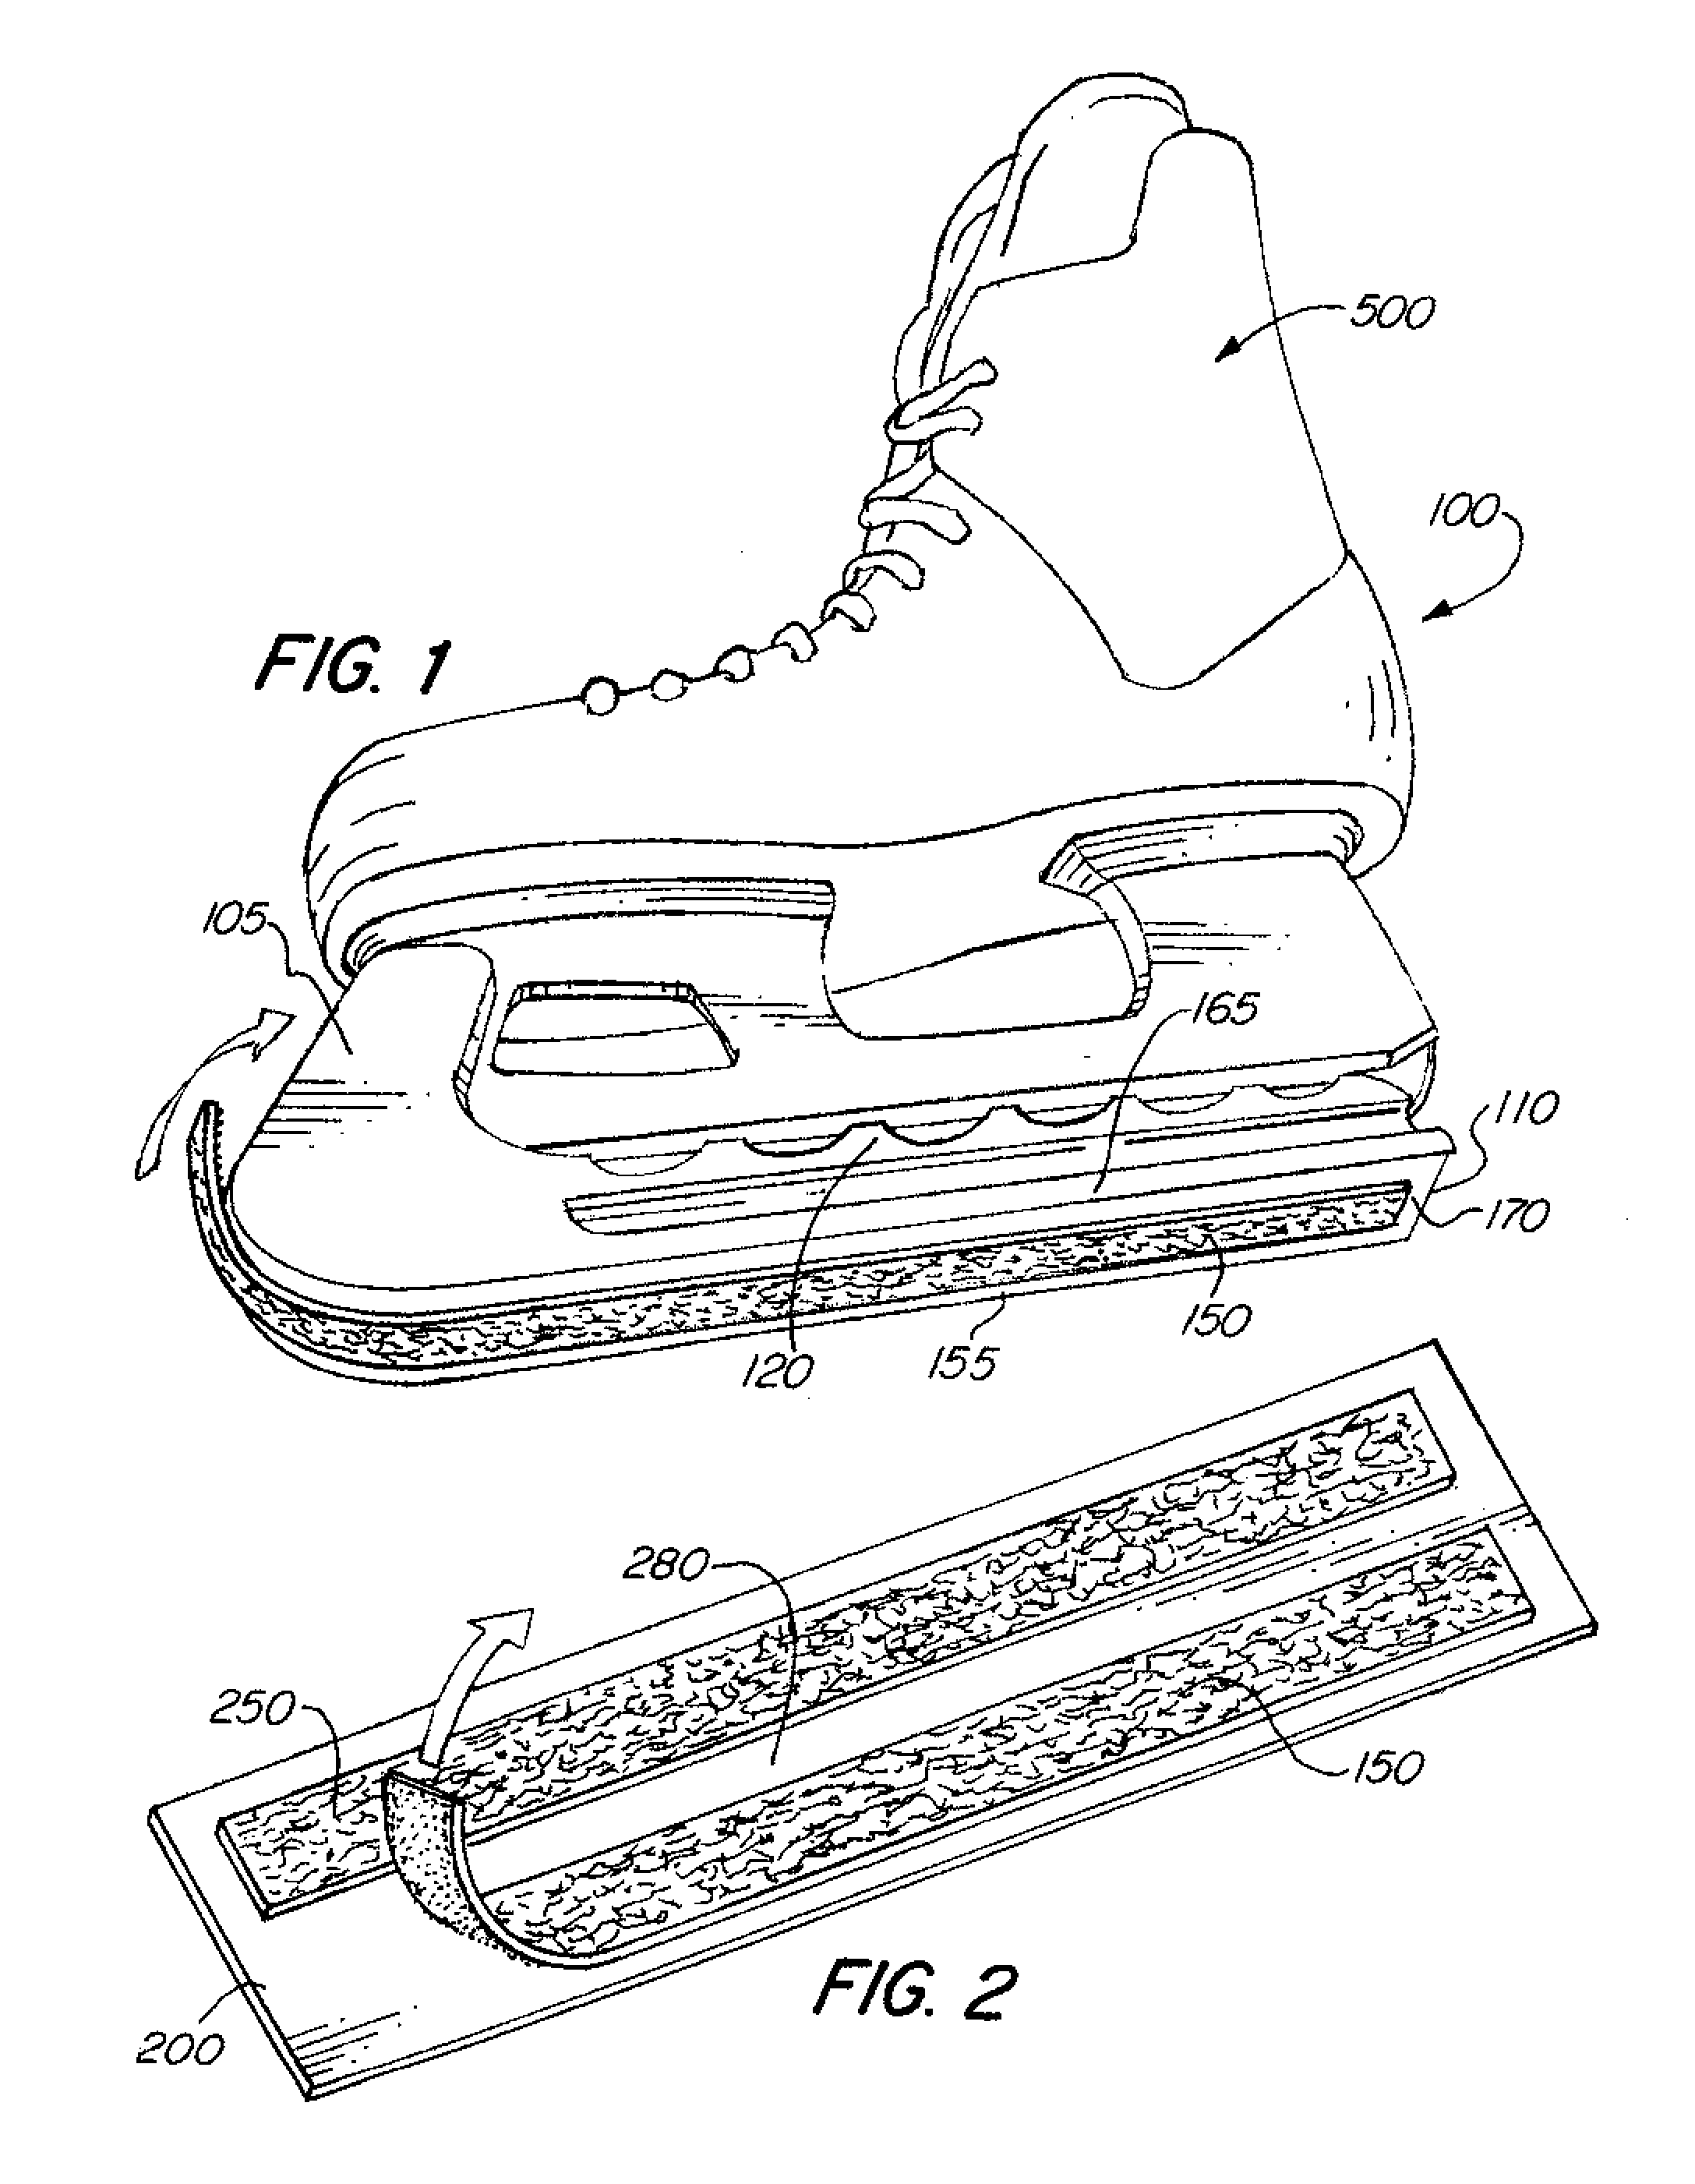 Traction Device To Walk On Ice While Wearing Ice Skate Scabbard